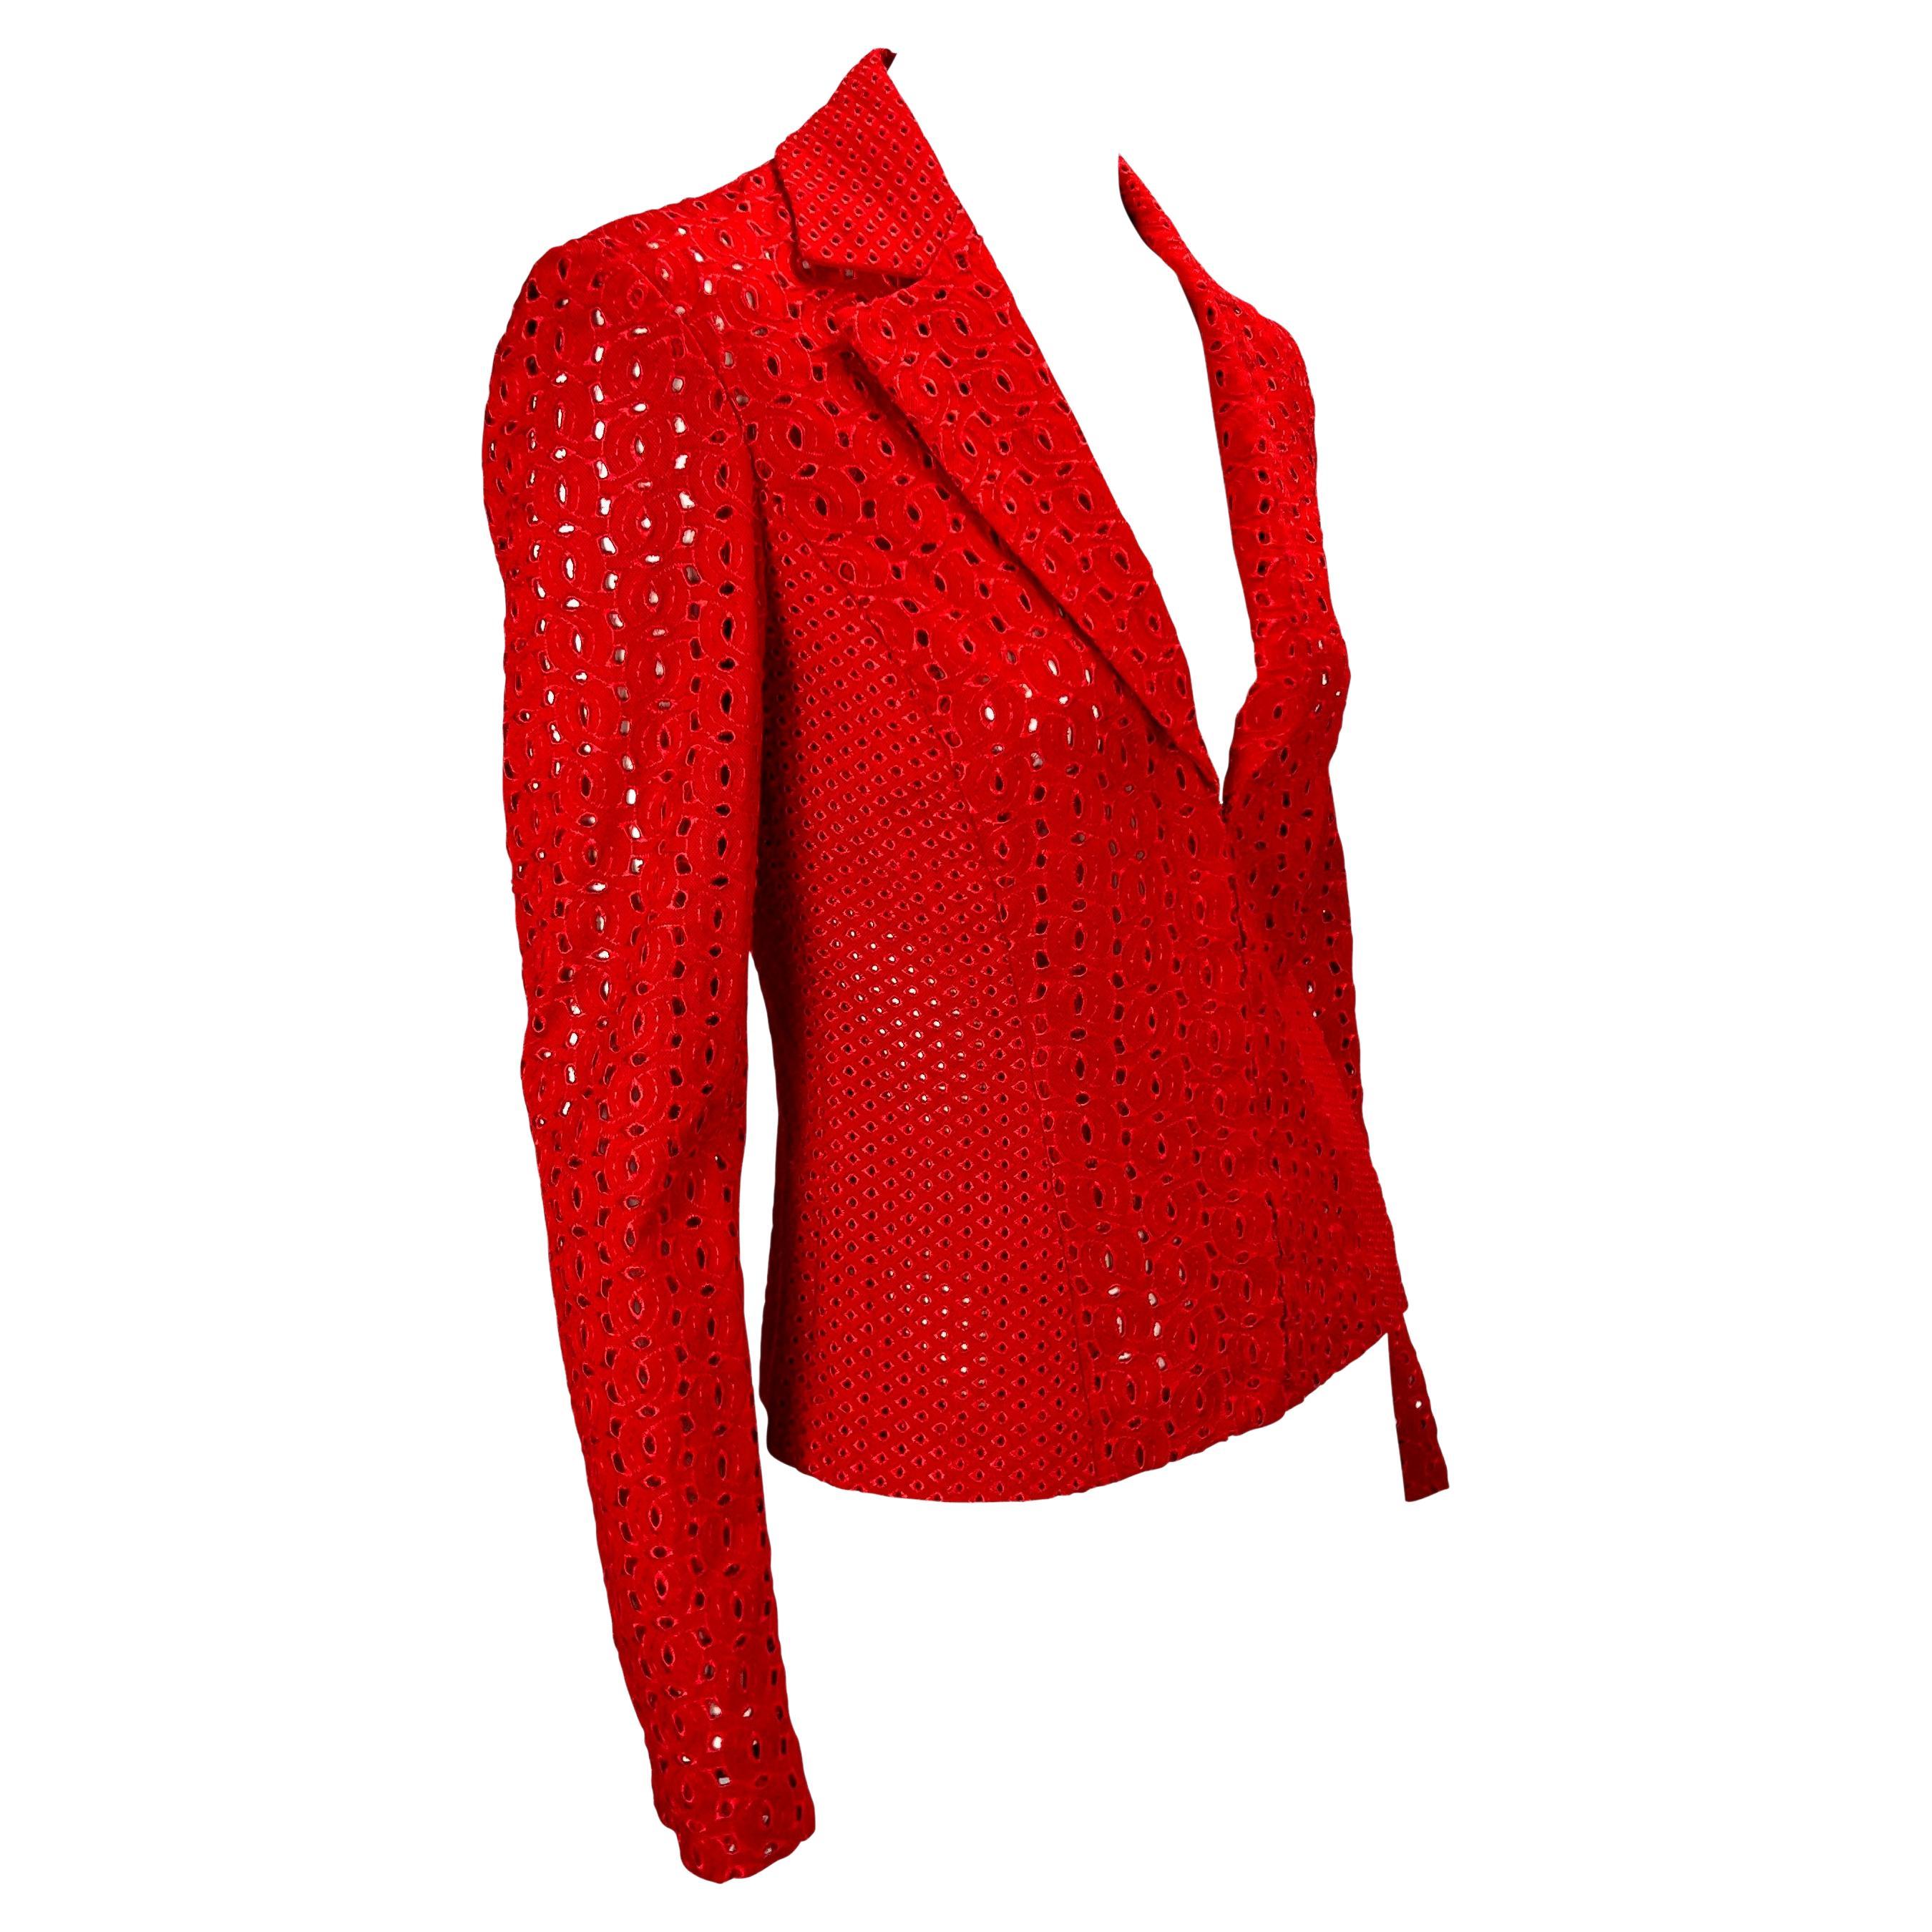 S/S 2002 Gianni Versace by Donatella Eyelet Cutout Red Sheer Blazer For Sale 7